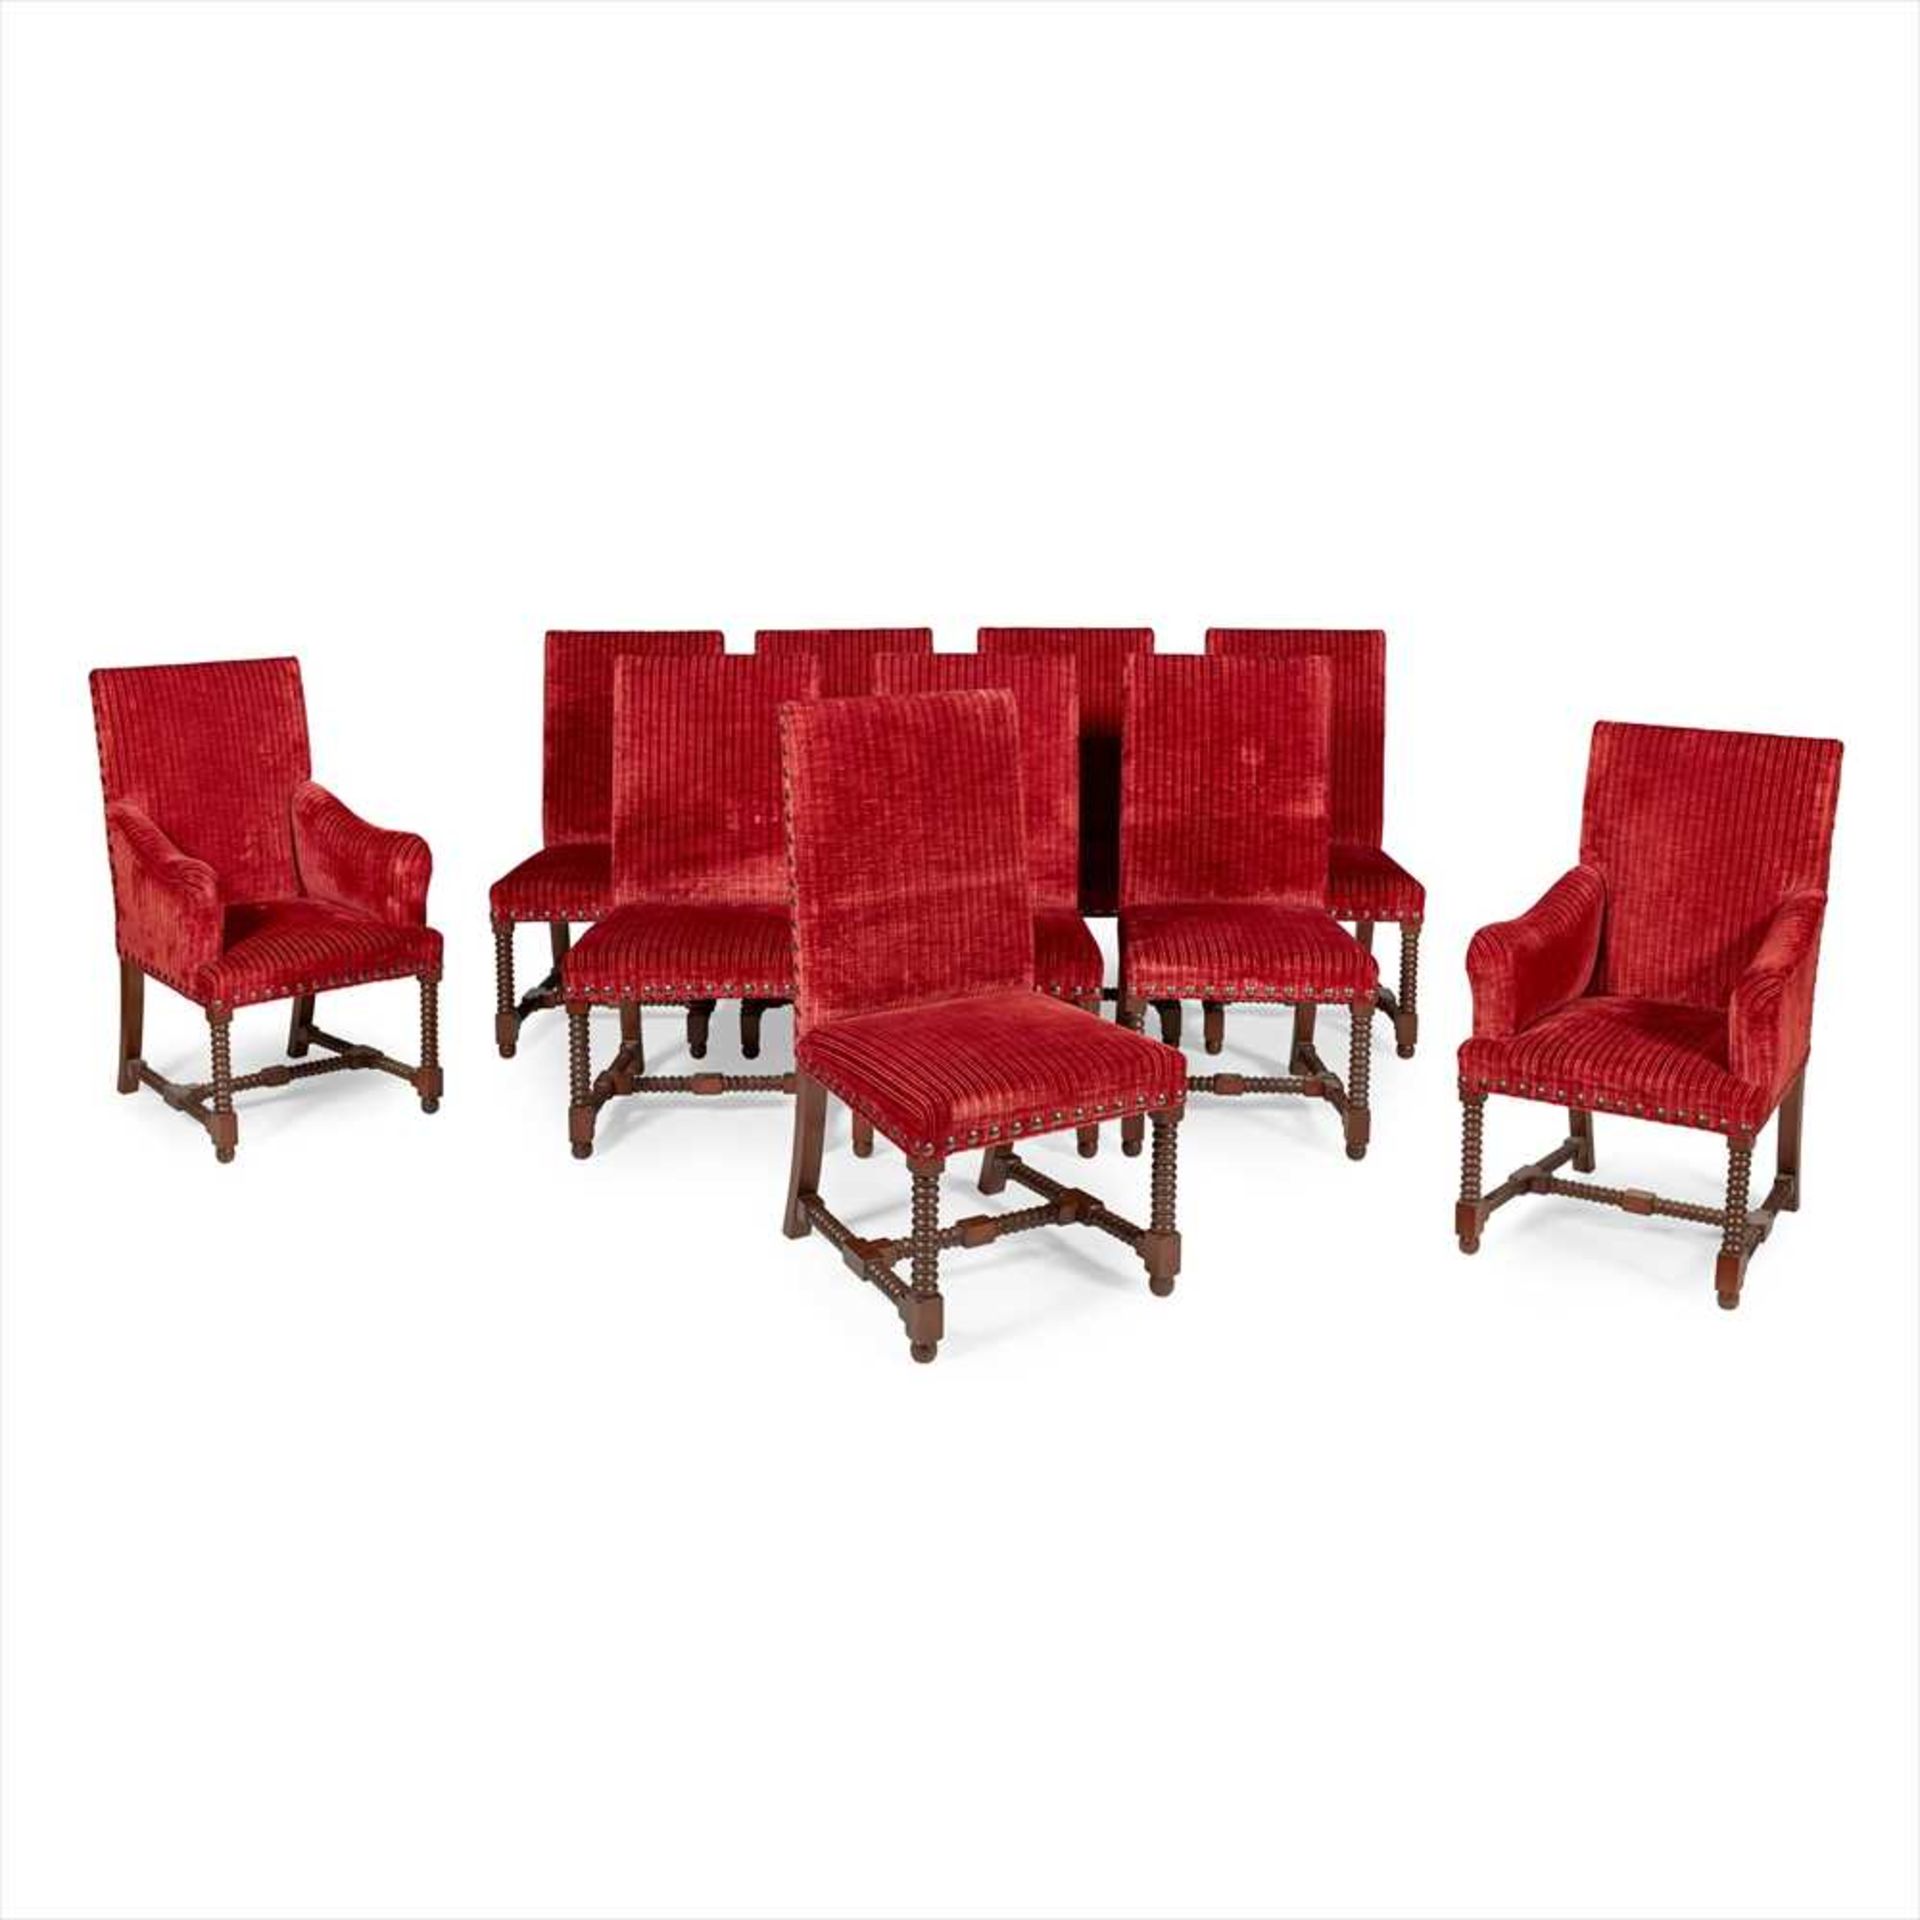 SET OF TEN WILLIAM AND MARY STYLE DINING CHAIRS MODERN